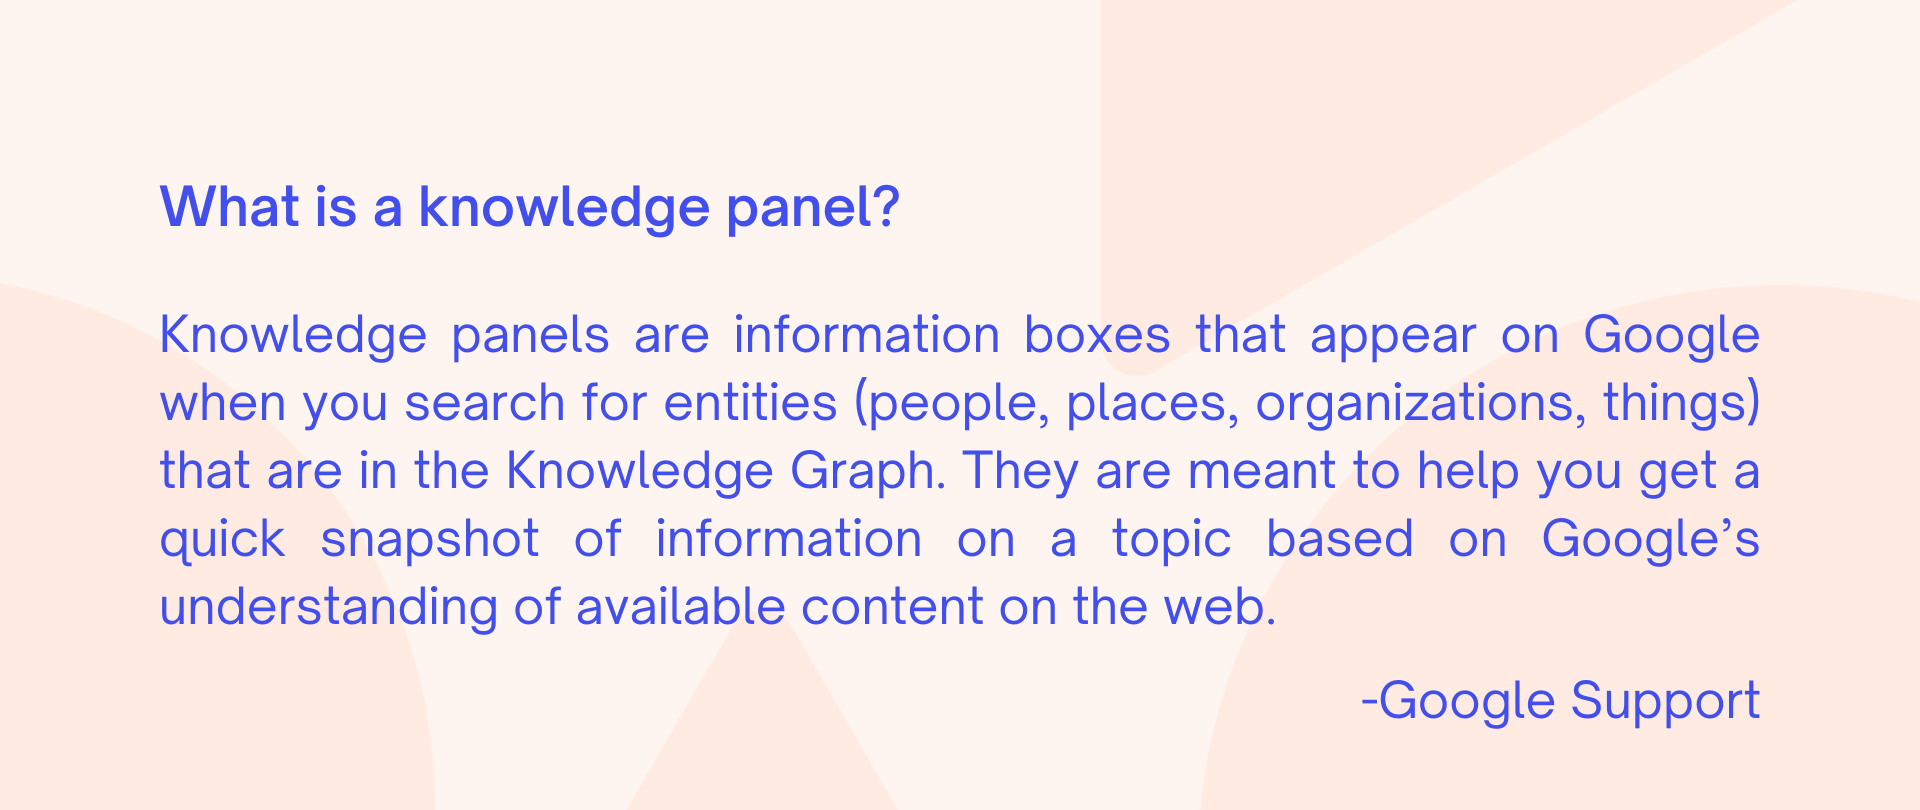 what is a knowledge panel - Agency Jet (1)